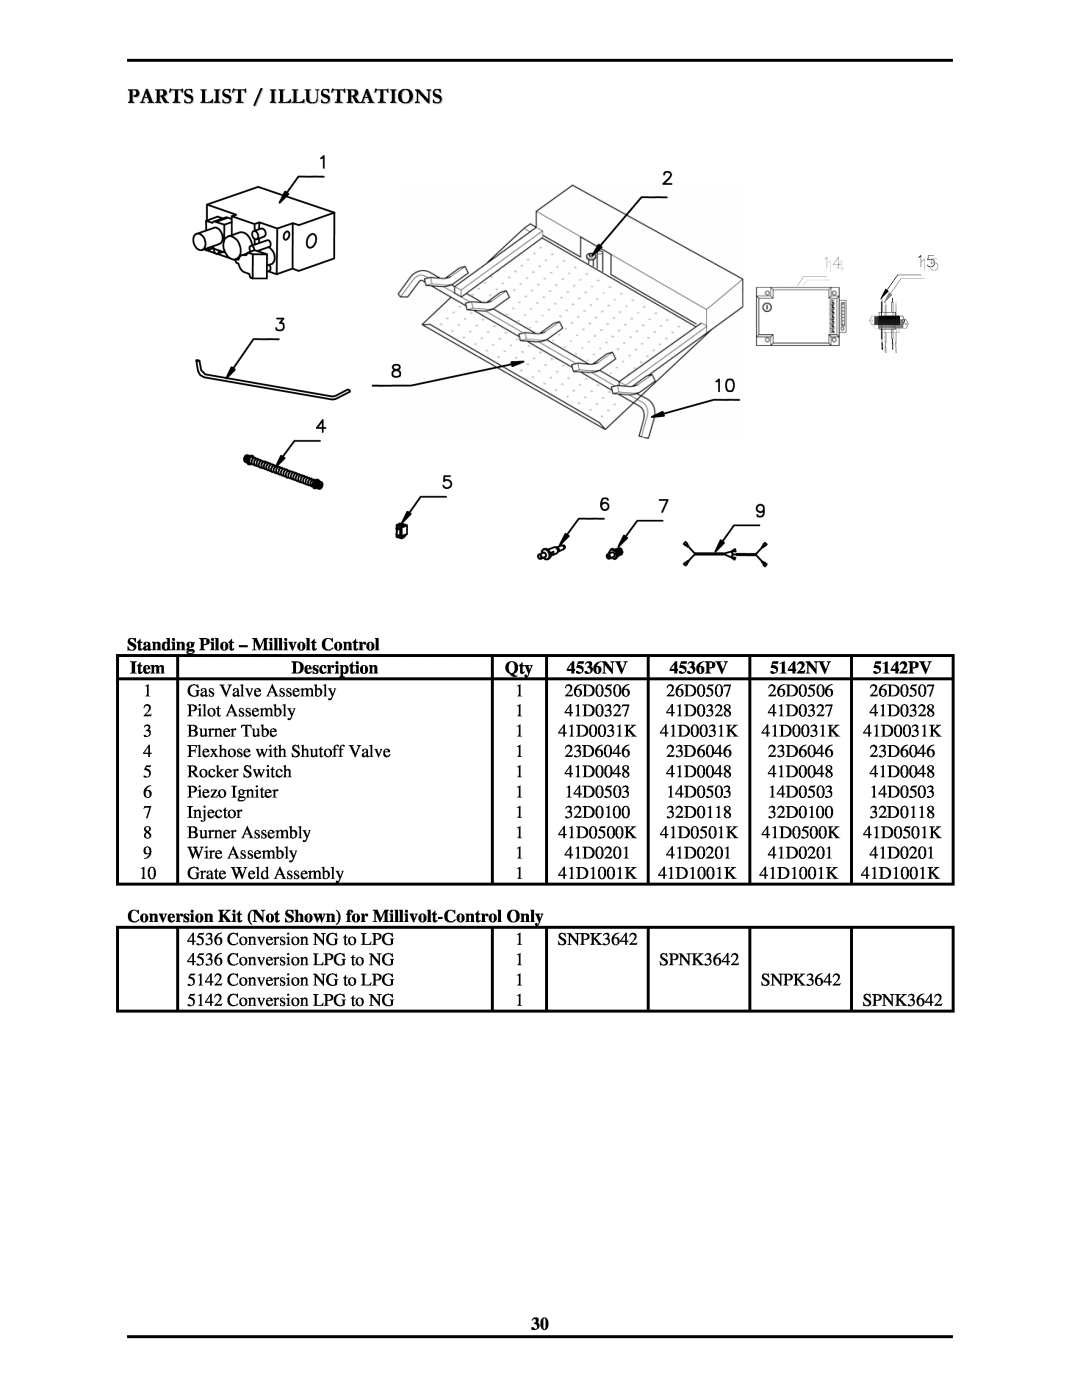 Monessen Hearth 7000 Series operating instructions Parts List / Illustrations, Engine Components 